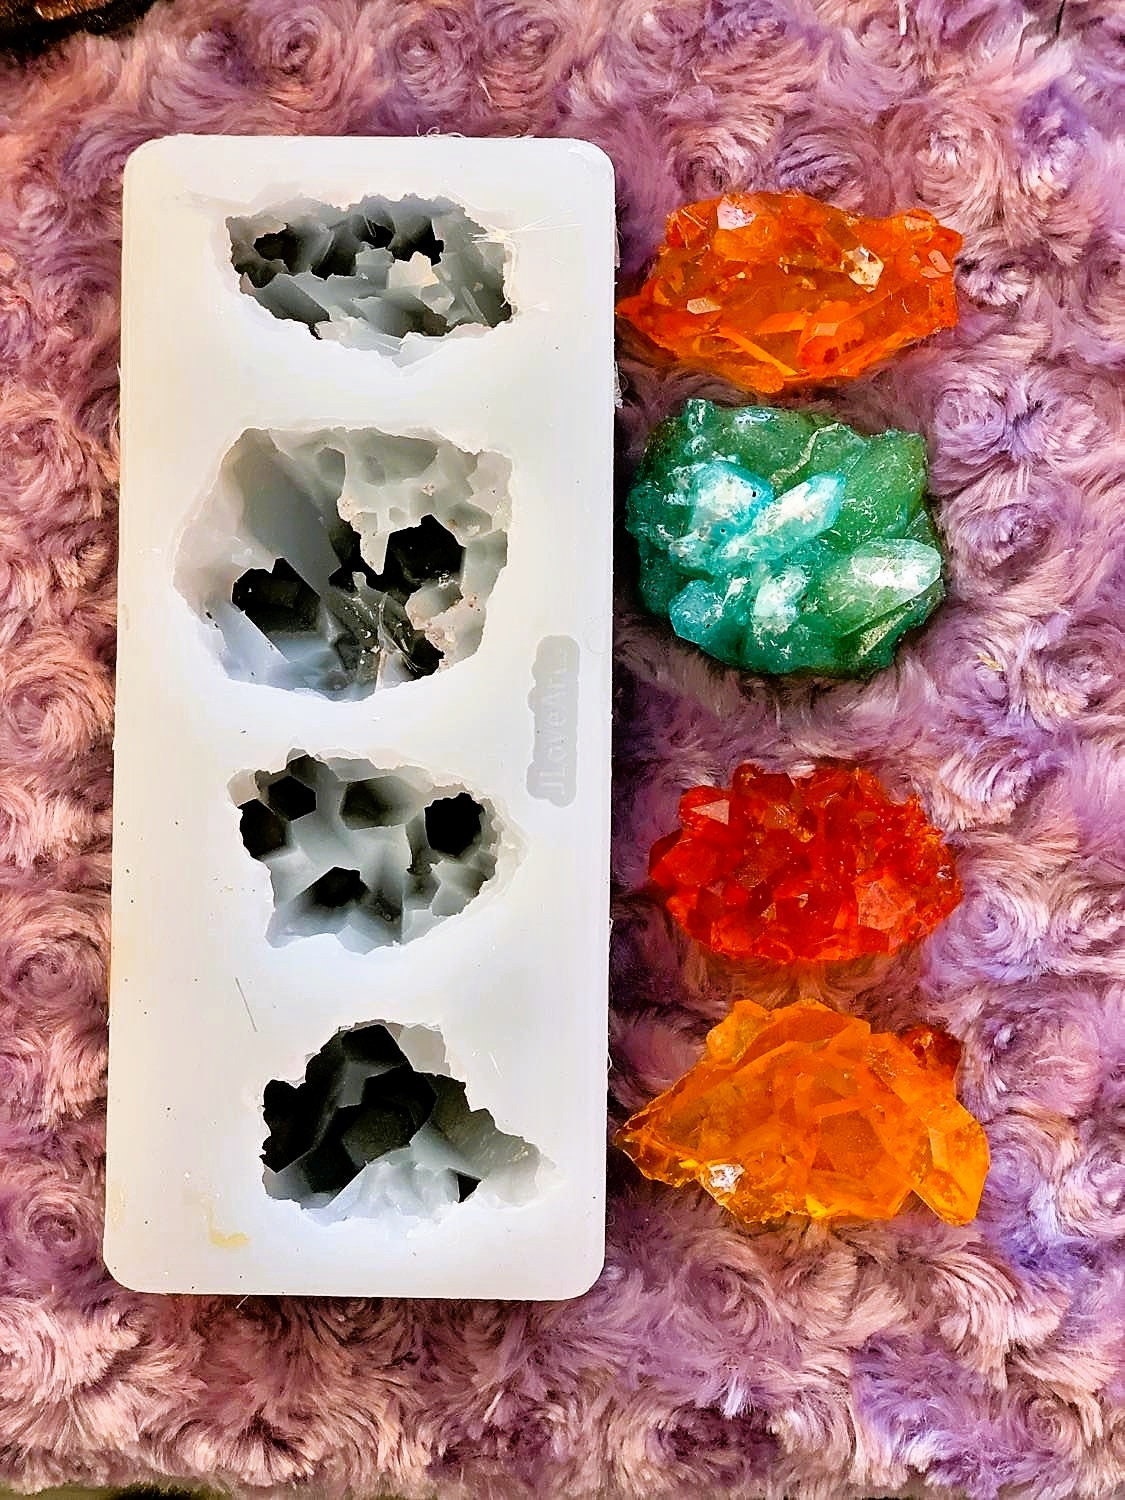  10 Pcs Resin Crystal Molds, Silicone Crystal Molds for Resin,  Growing Crystal Cluster Molds Quartz Rock Resin Silicone Molds Crystal  Stone Resin Molds for Candles,Gems,Tray Decoration : Home & Kitchen